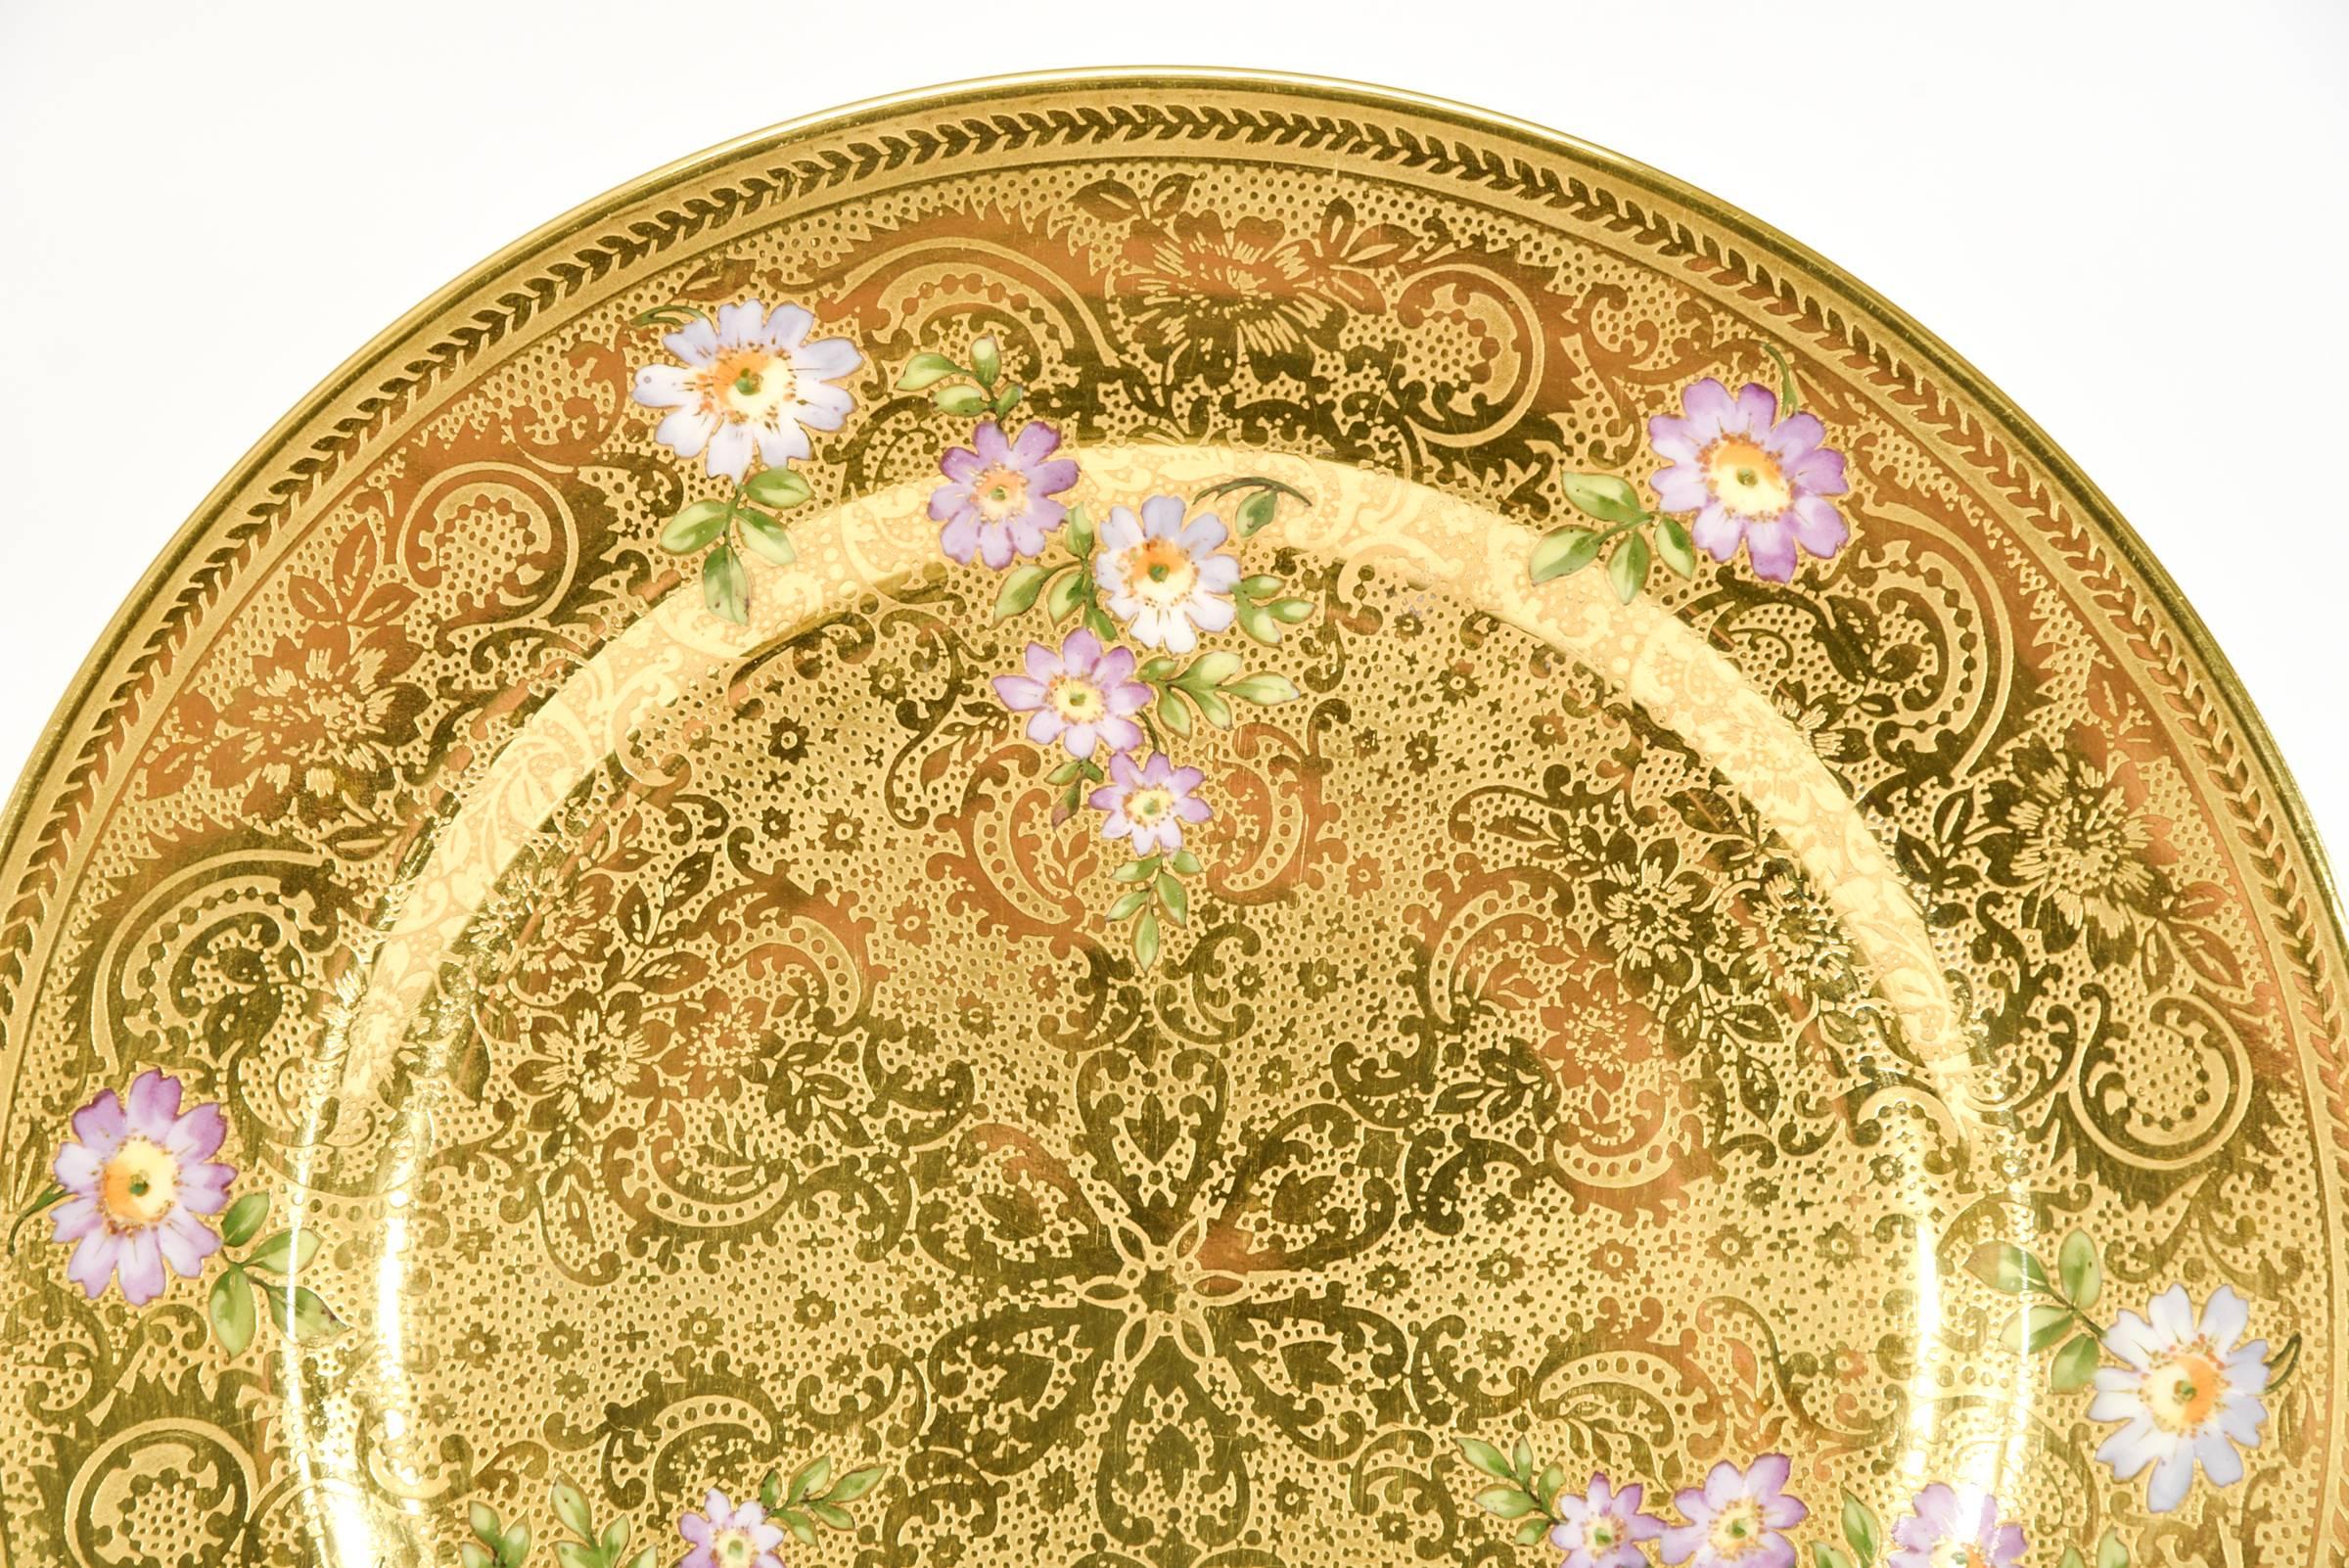 Enameled 12 Limoges Embossed Allover Gold Service Plates with Hand-Painted Purple Flowers